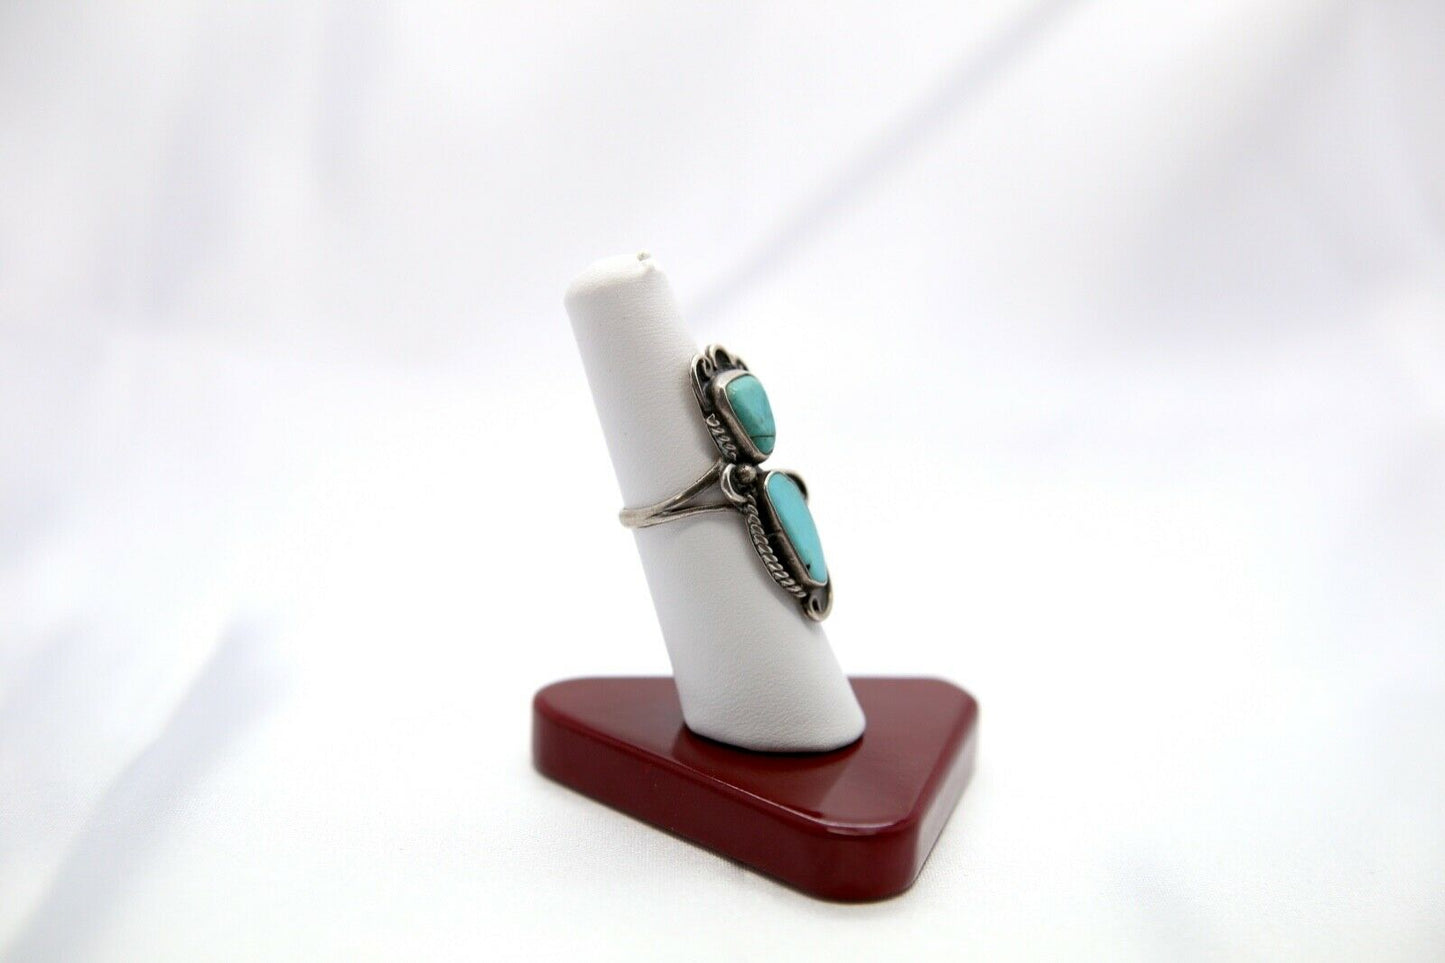 Vintage Sterling Silver Turquoise Ring, Size 6.5 - 4.8g